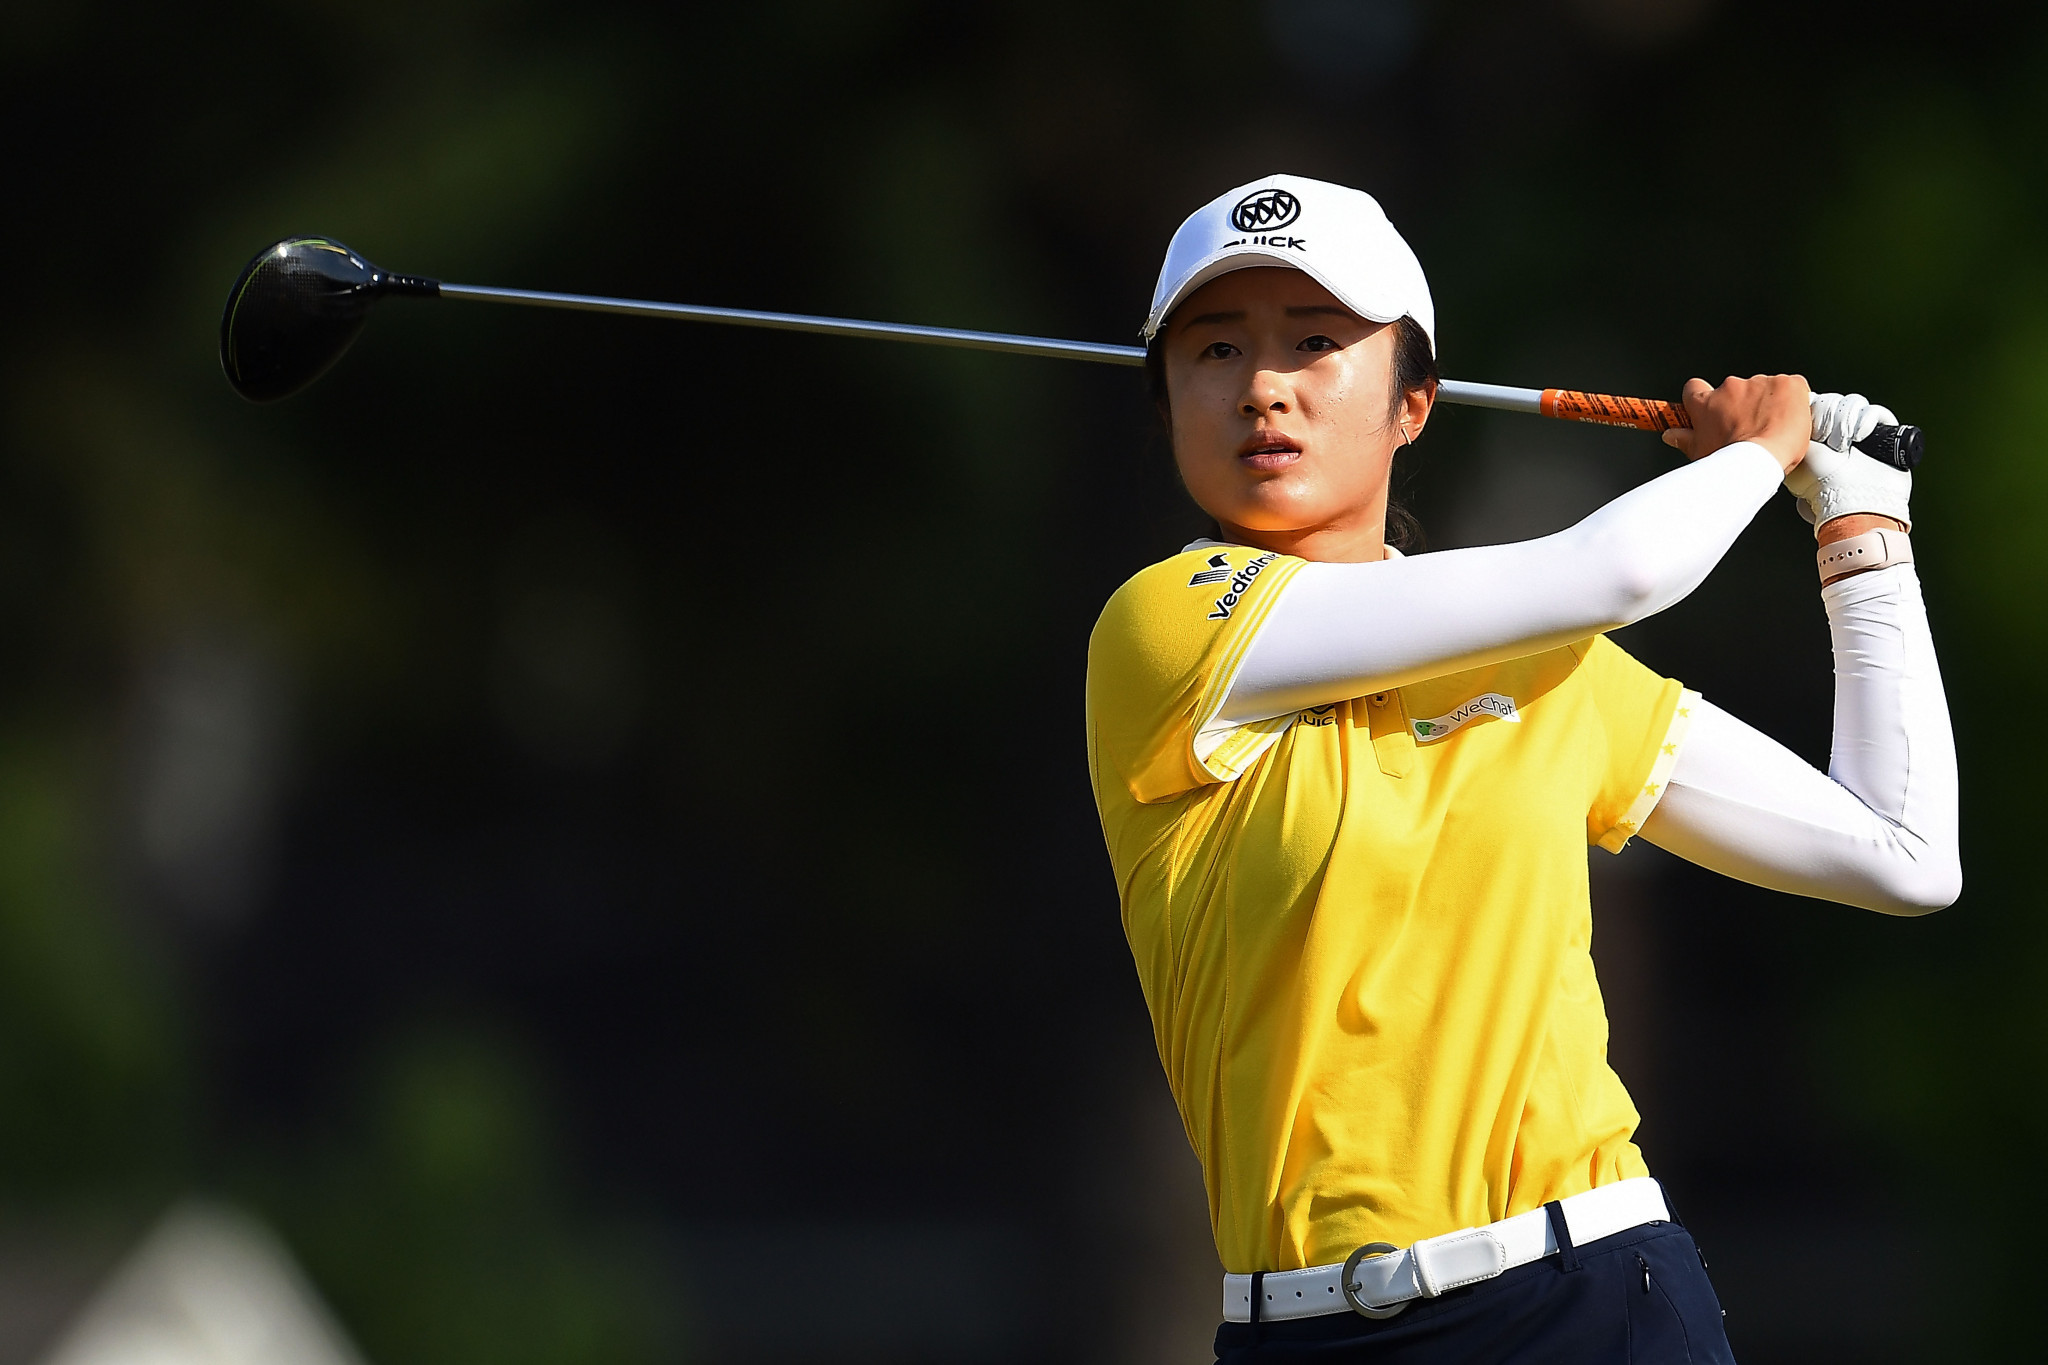 Debutant Liu and Boutier tied for lead at US Women's Open